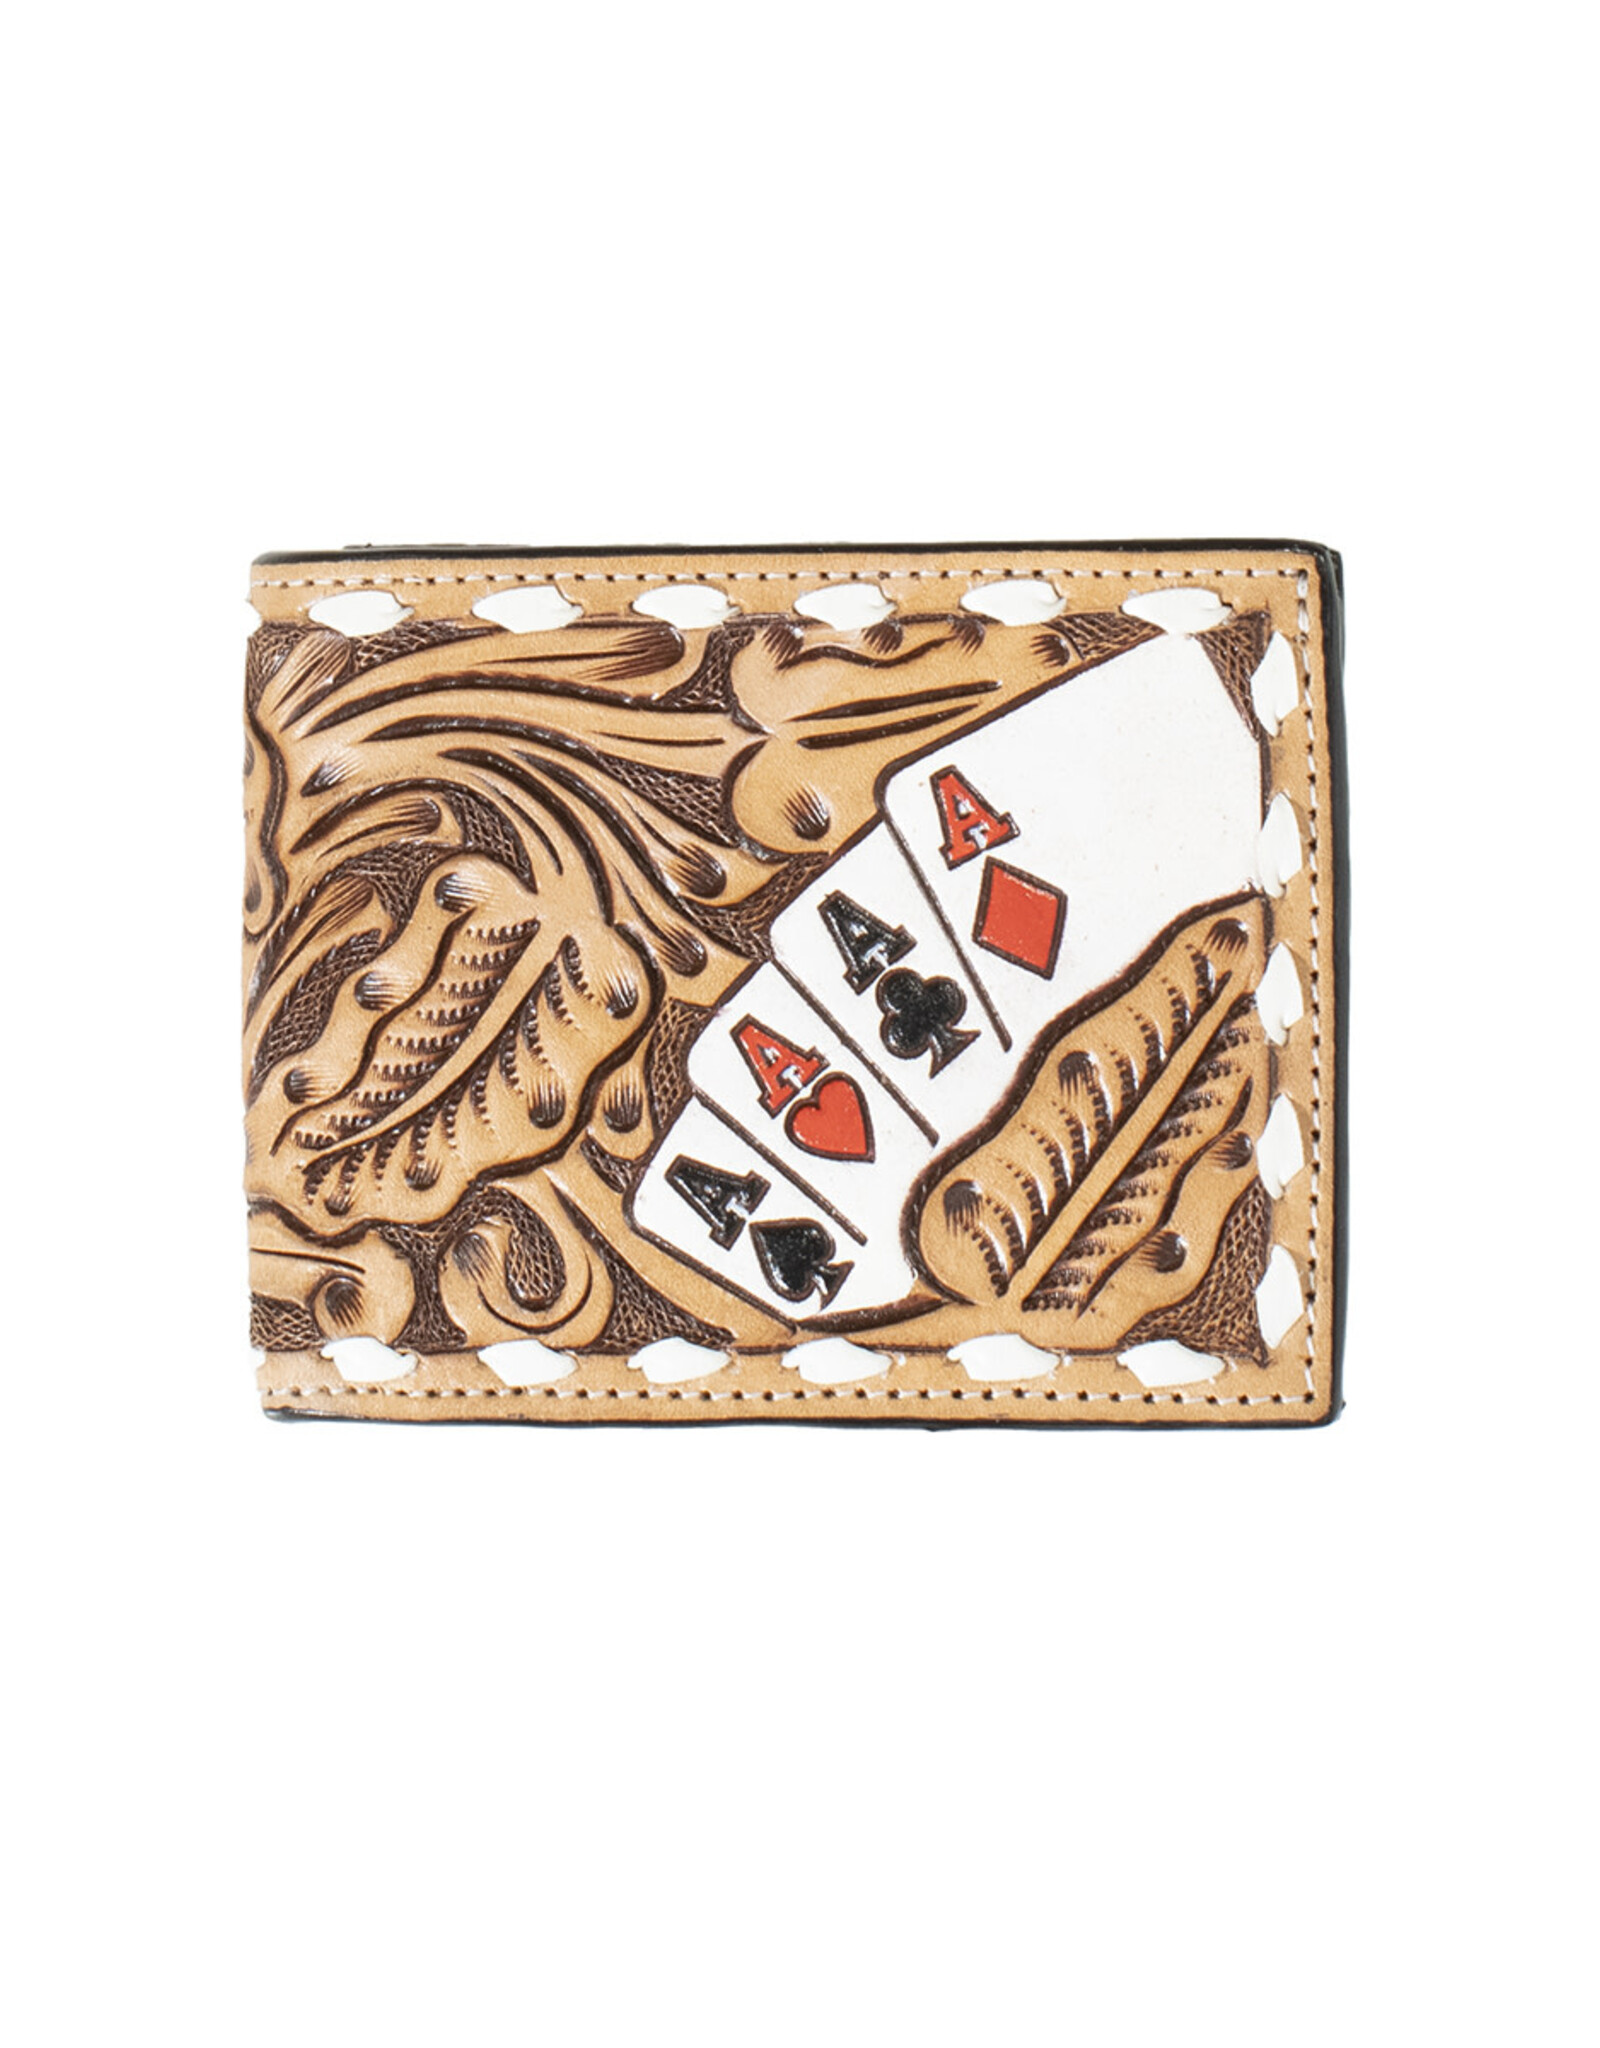 3D WALLET MENS BILFOLD HAND PAINTED ACE CARDS - NATURAL